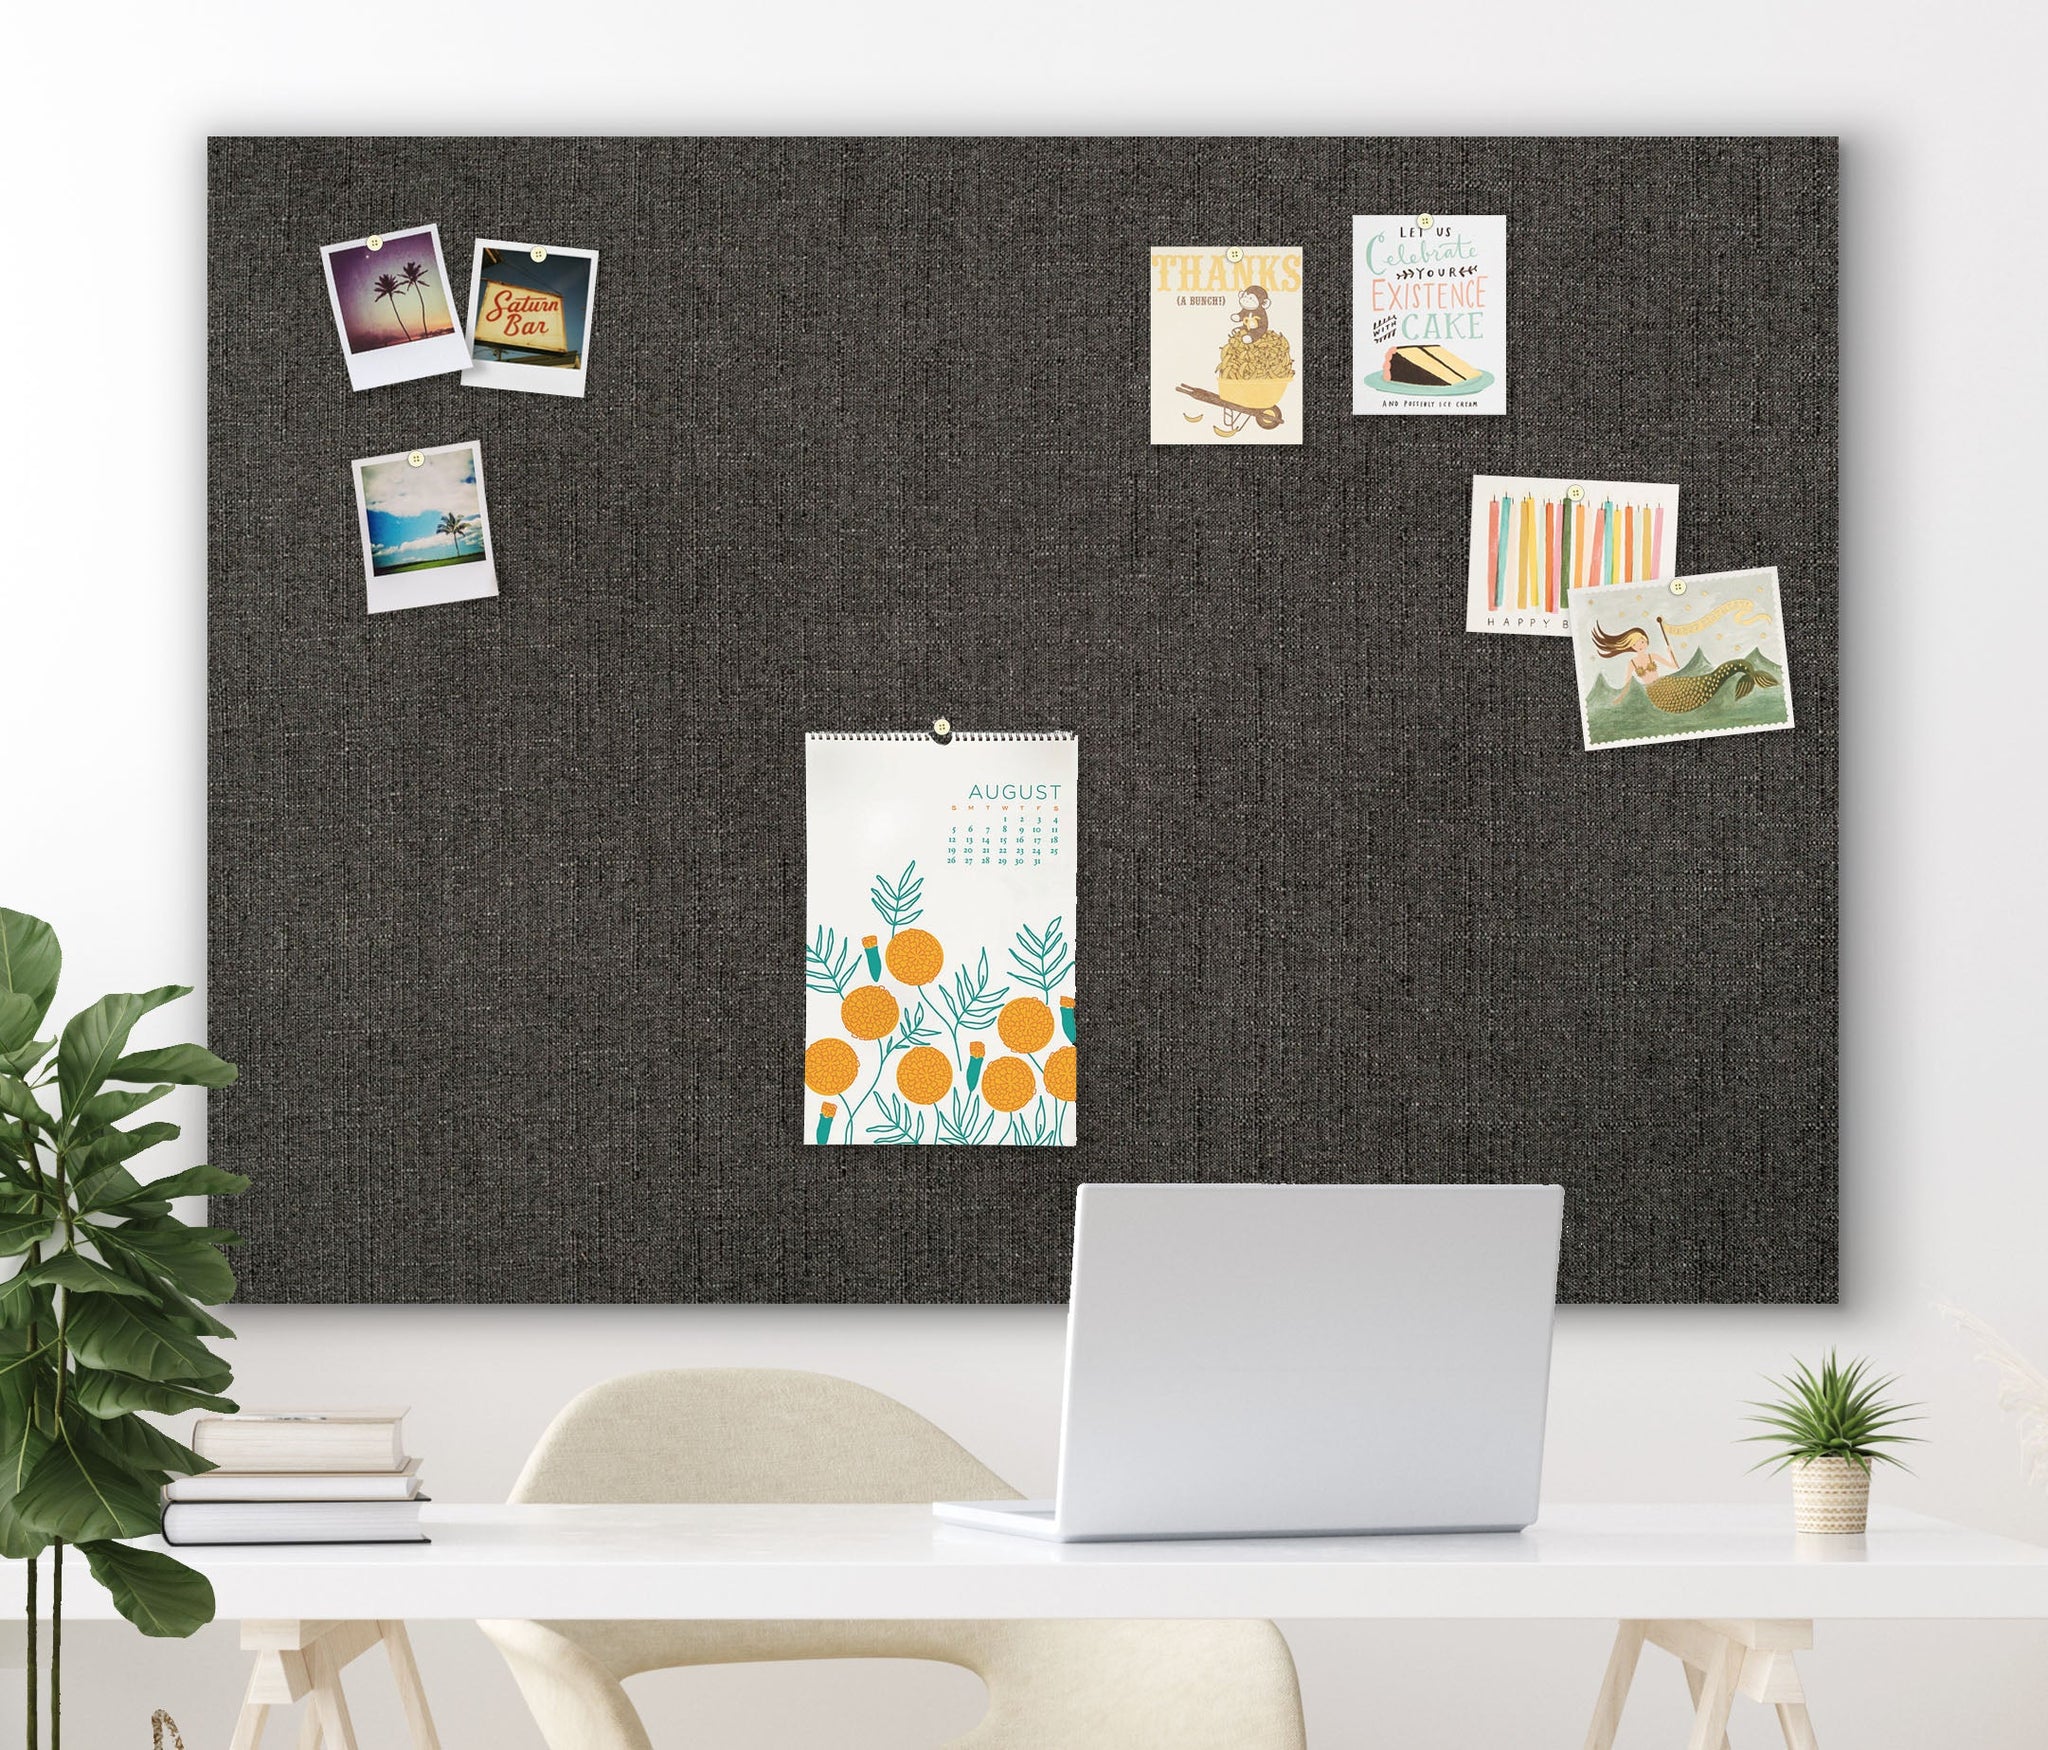 4 THOUGHT Chalkboard Calendar Corkboard Combo, 12 x 16 Small Bulletin  Board Magnetic Calendar Chalkboard for Wall Combination Board Monthly  Planner